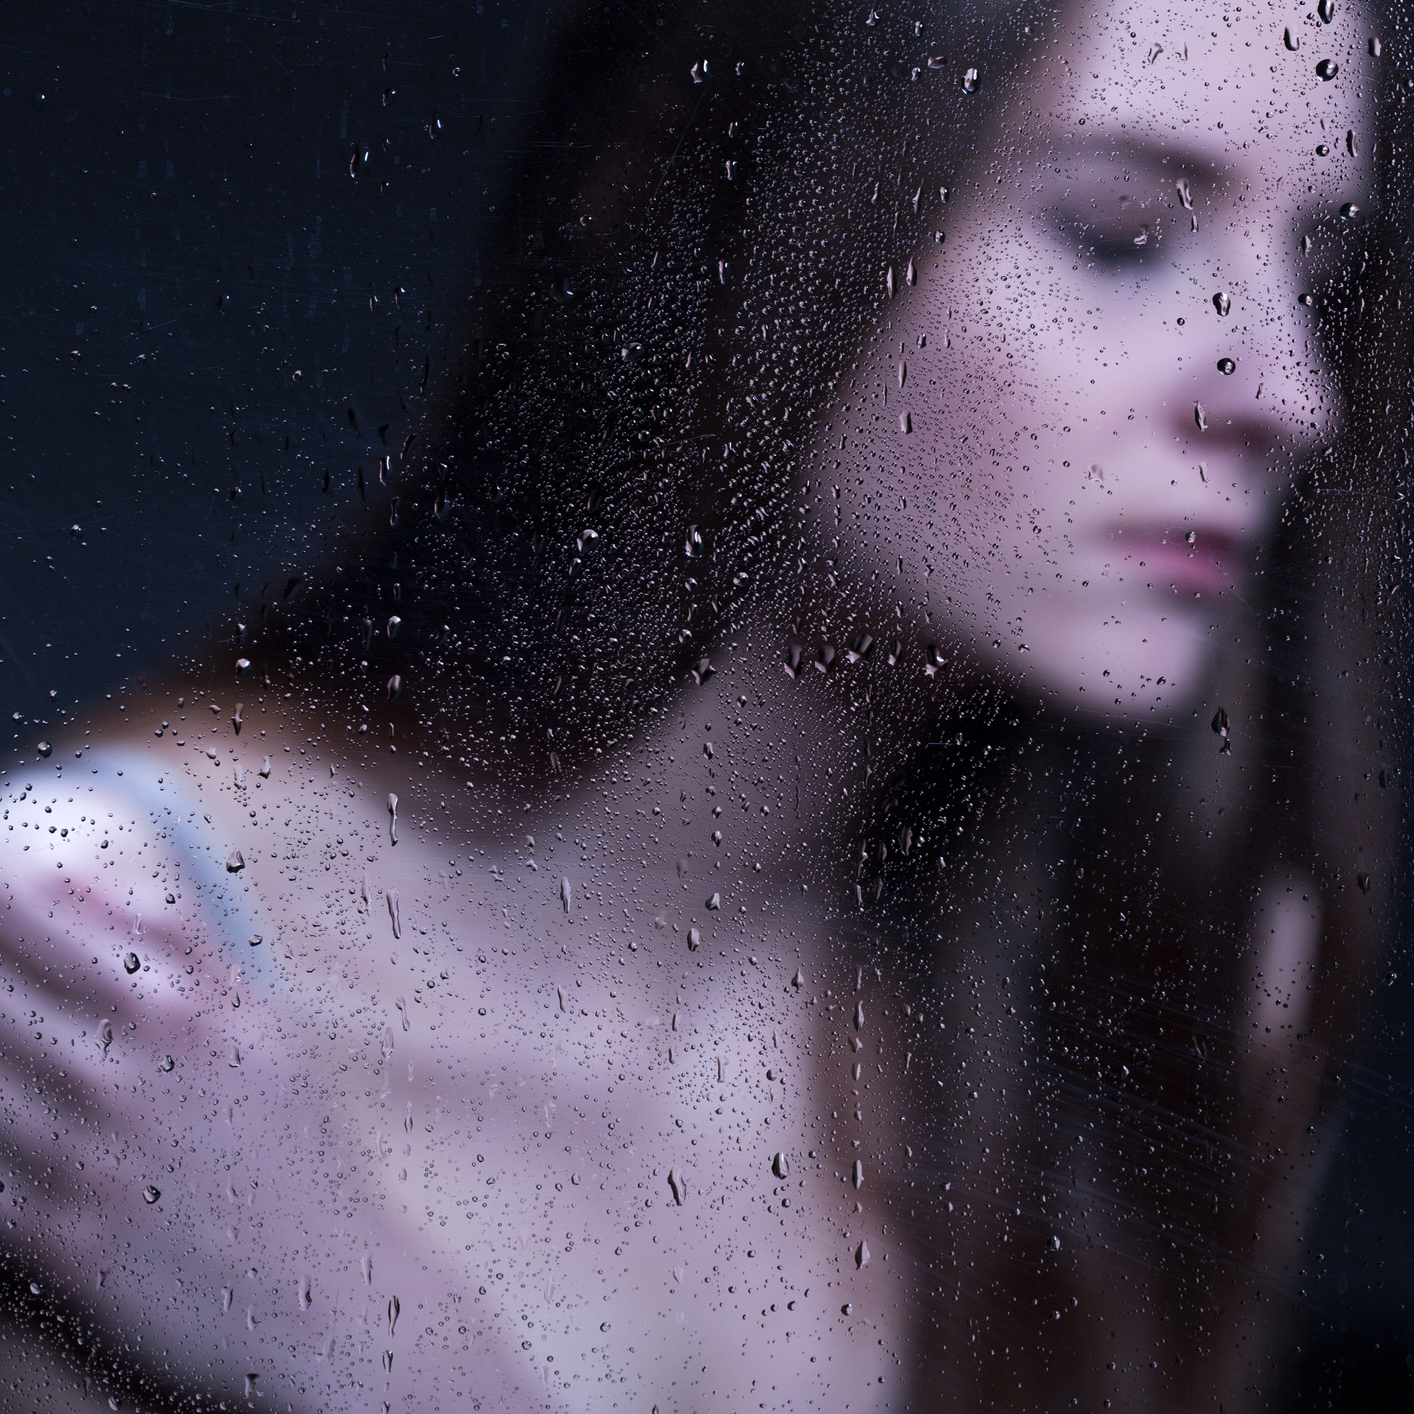 Woman stands behind glass with drops of water covering it.